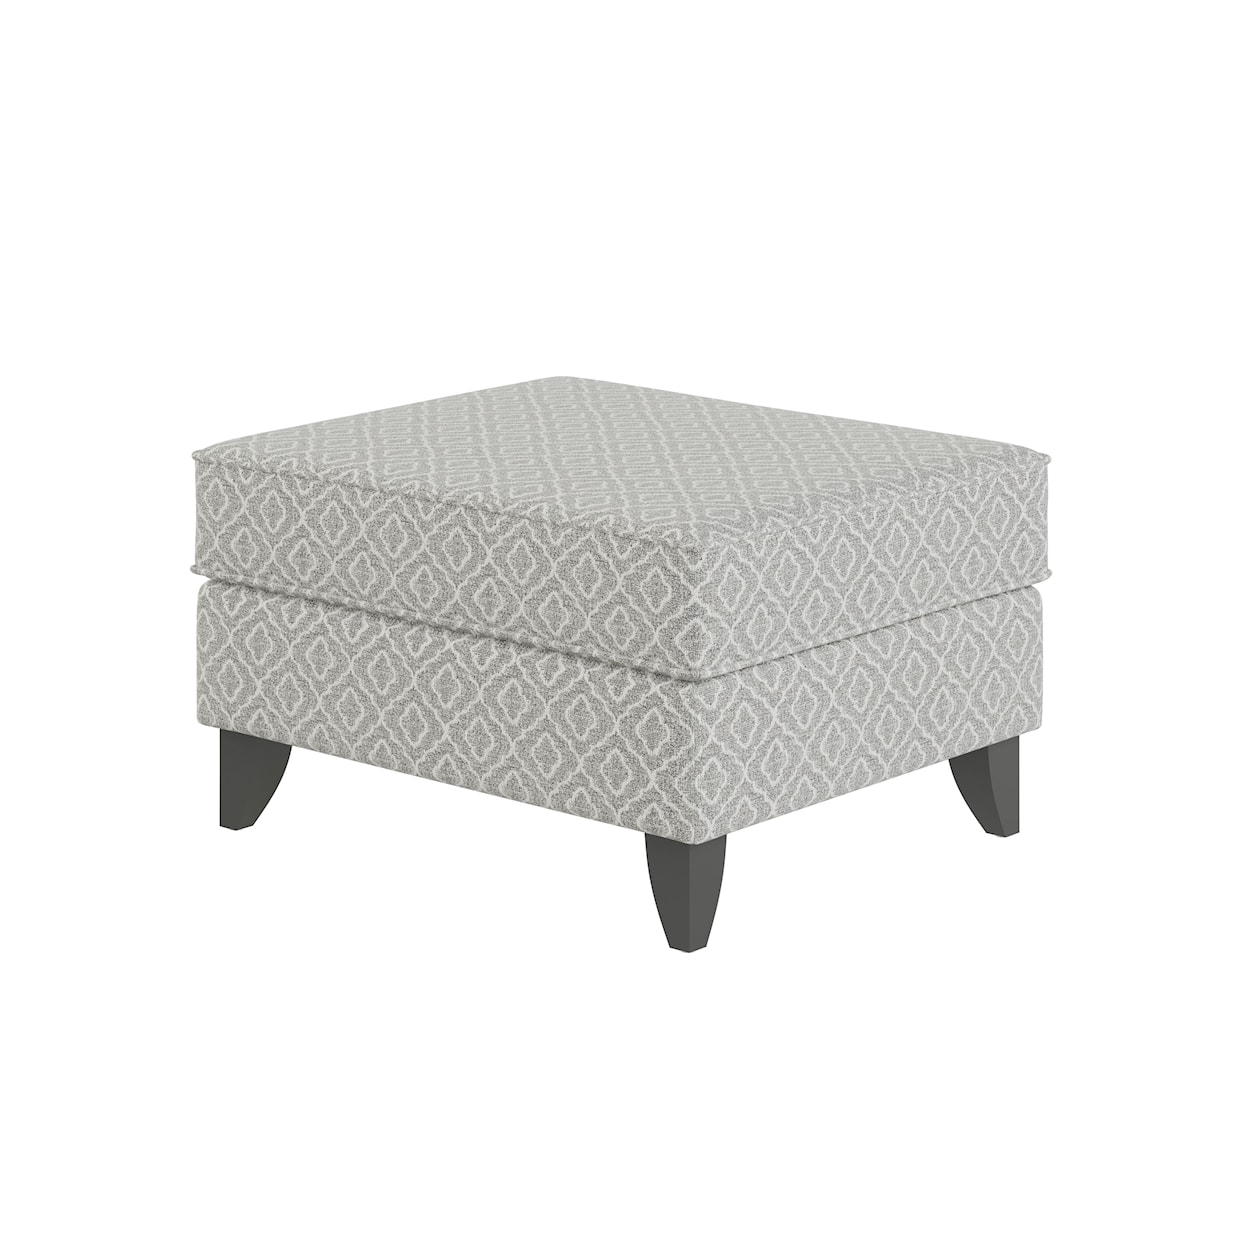 Fusion Furniture 7000 LIMELIGHT MINERAL Accent Ottoman